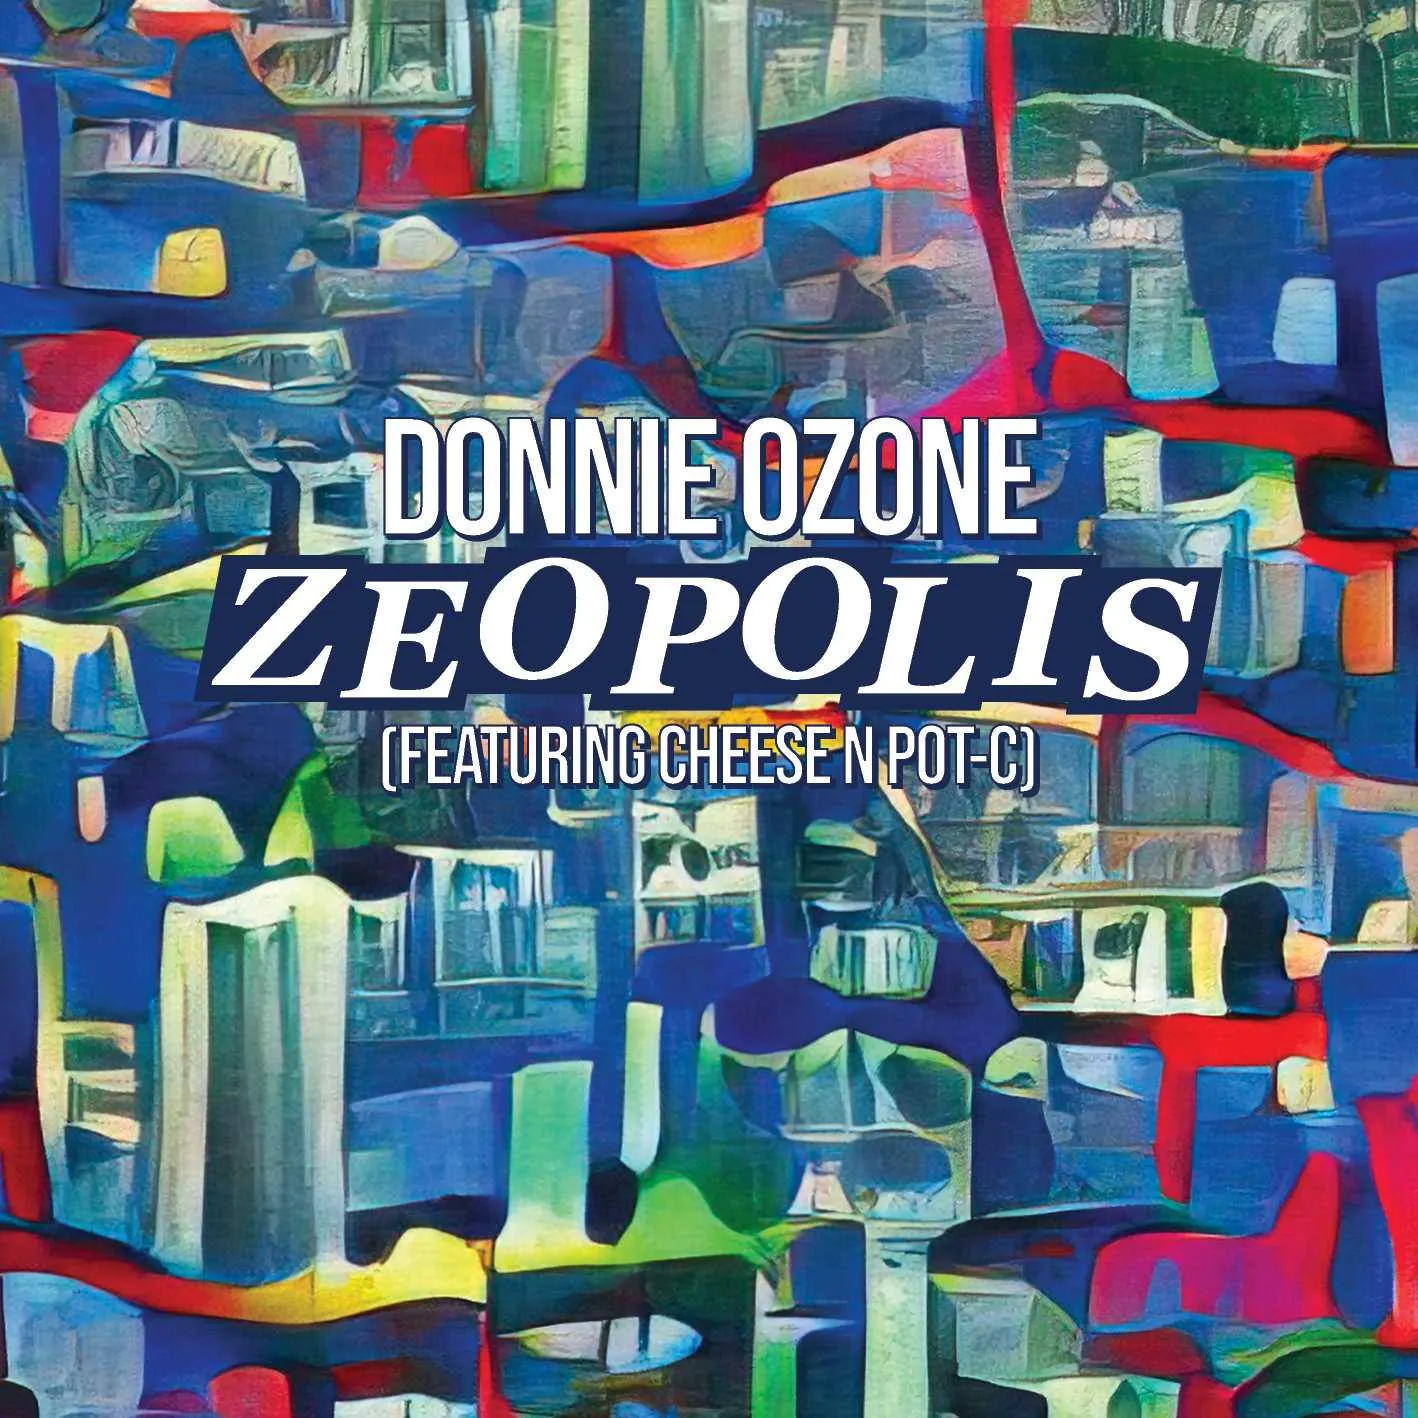 Album cover for “Zeopolis (Featuring Cheese N Pot-C)” by Donnie Ozone